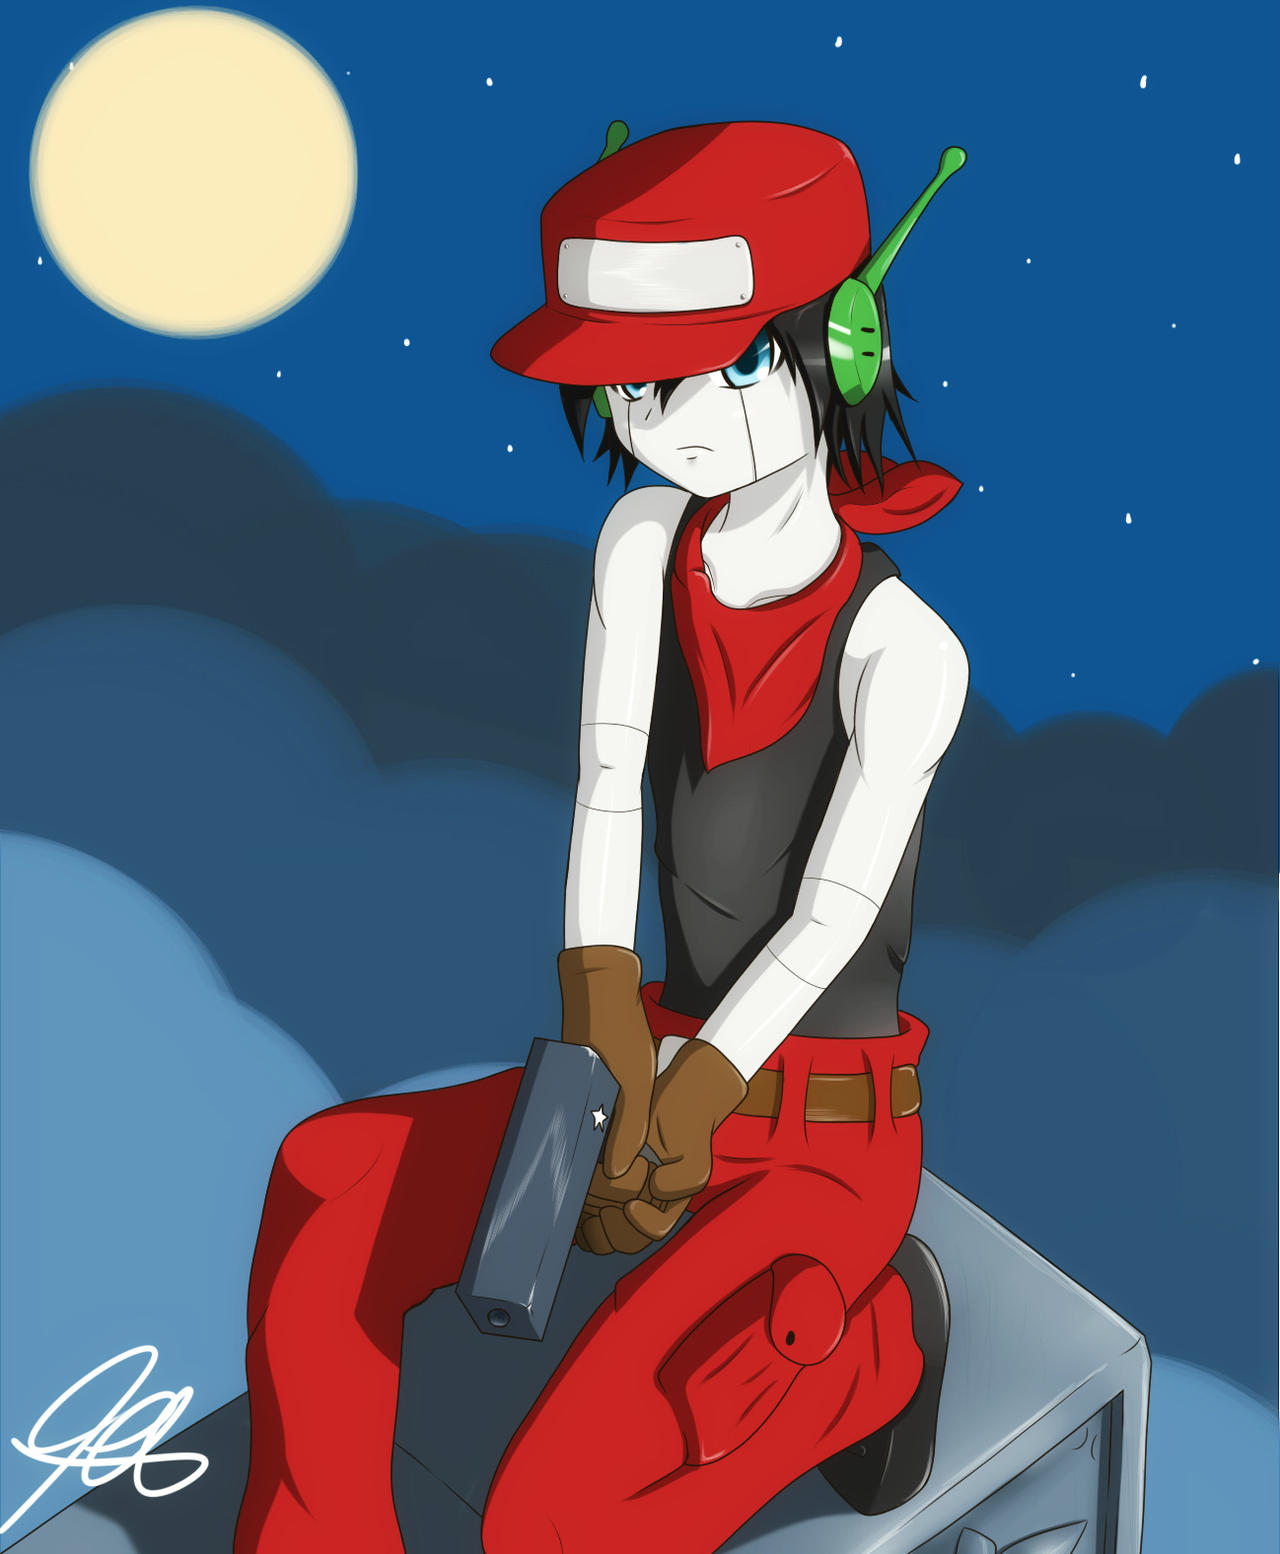 cave_story__quote_by_prometheuspandora-d5fadt1.jpg